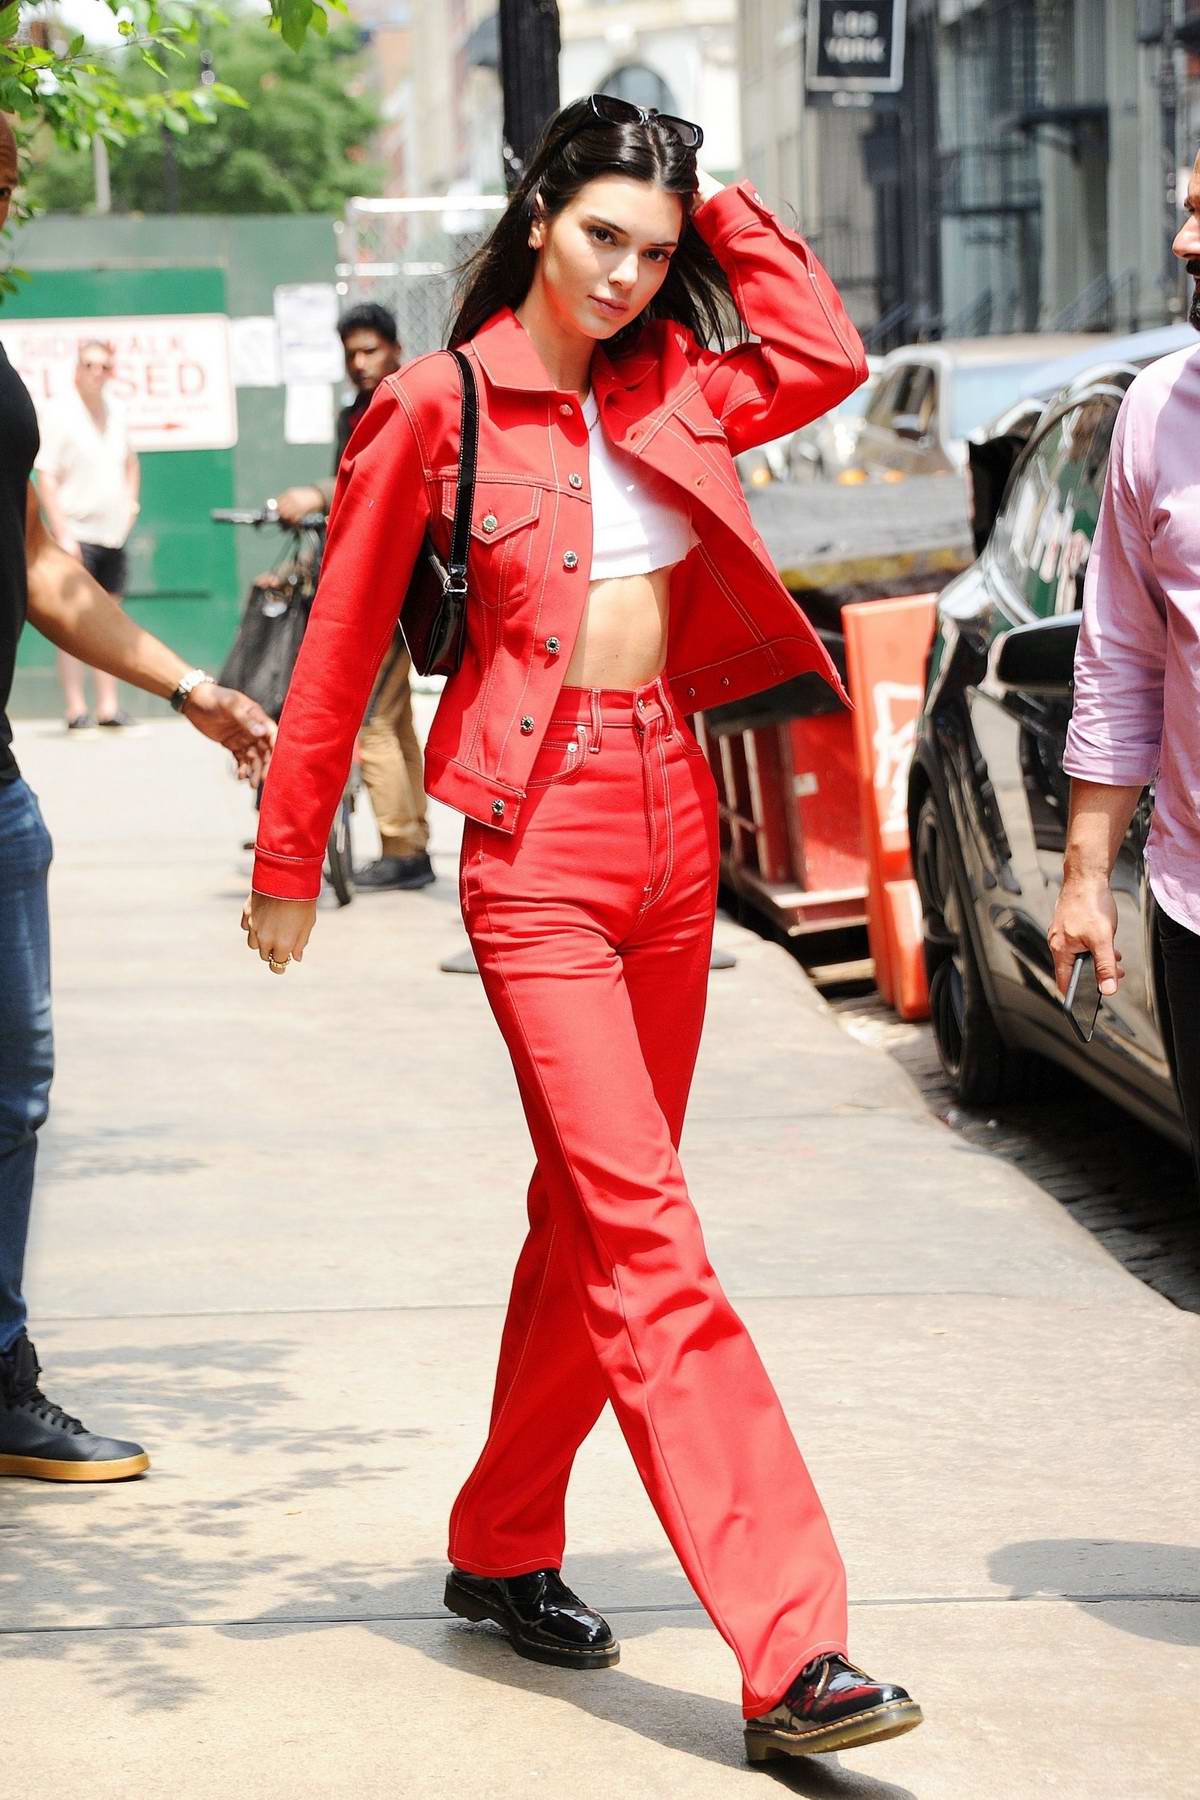 Kendall Jenner turns heads as she steps out in a matching red denim outfit  in SoHo